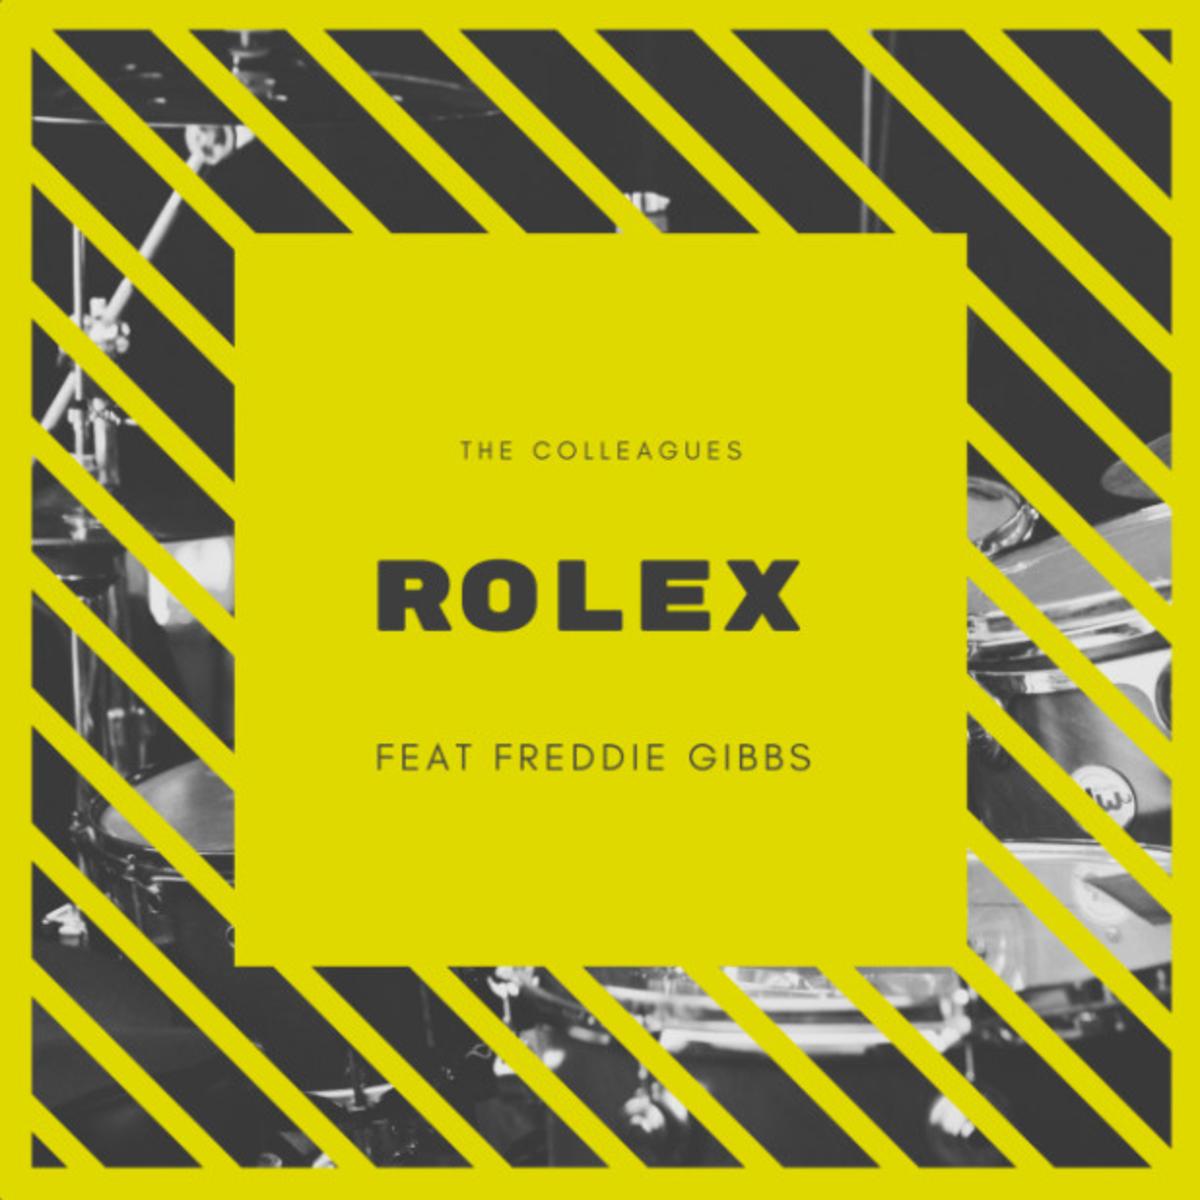 Freddie Gibbs & The Colleagues Reunite For “Rolex”